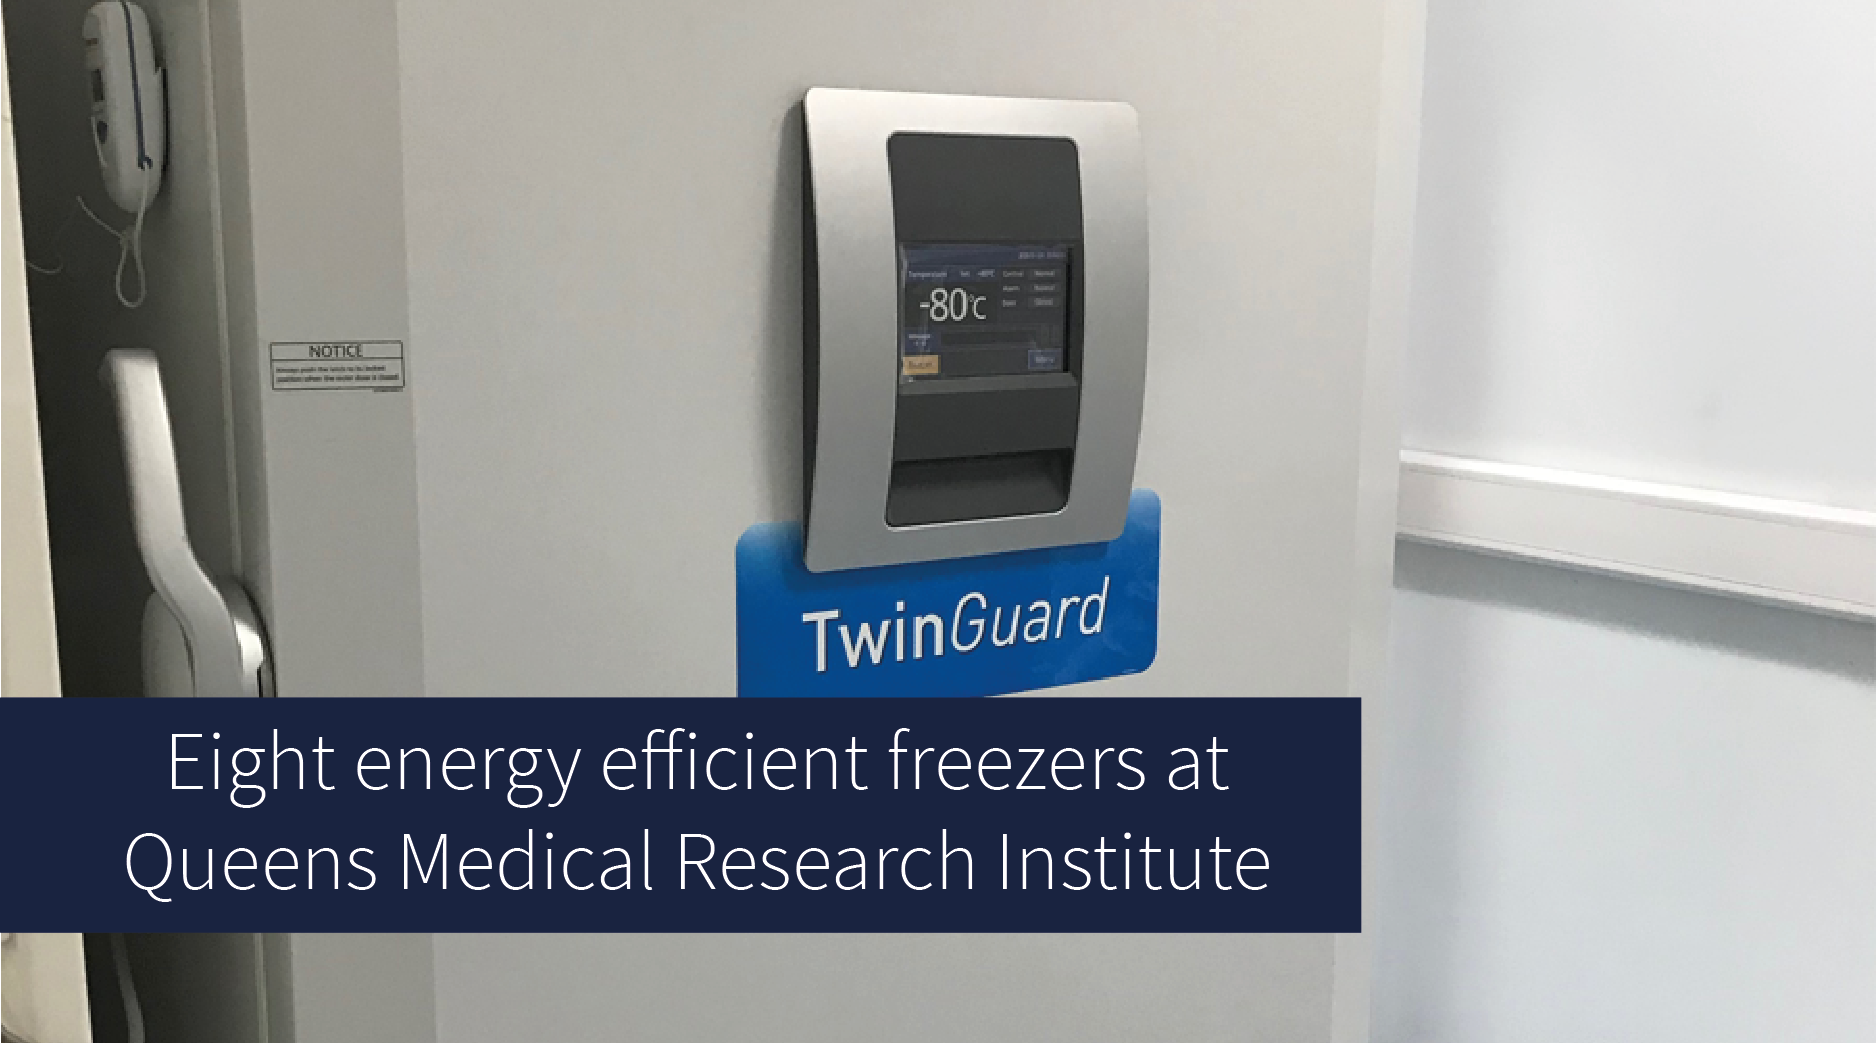 Eight energy efficient freezers at Queens Medical Research Institute